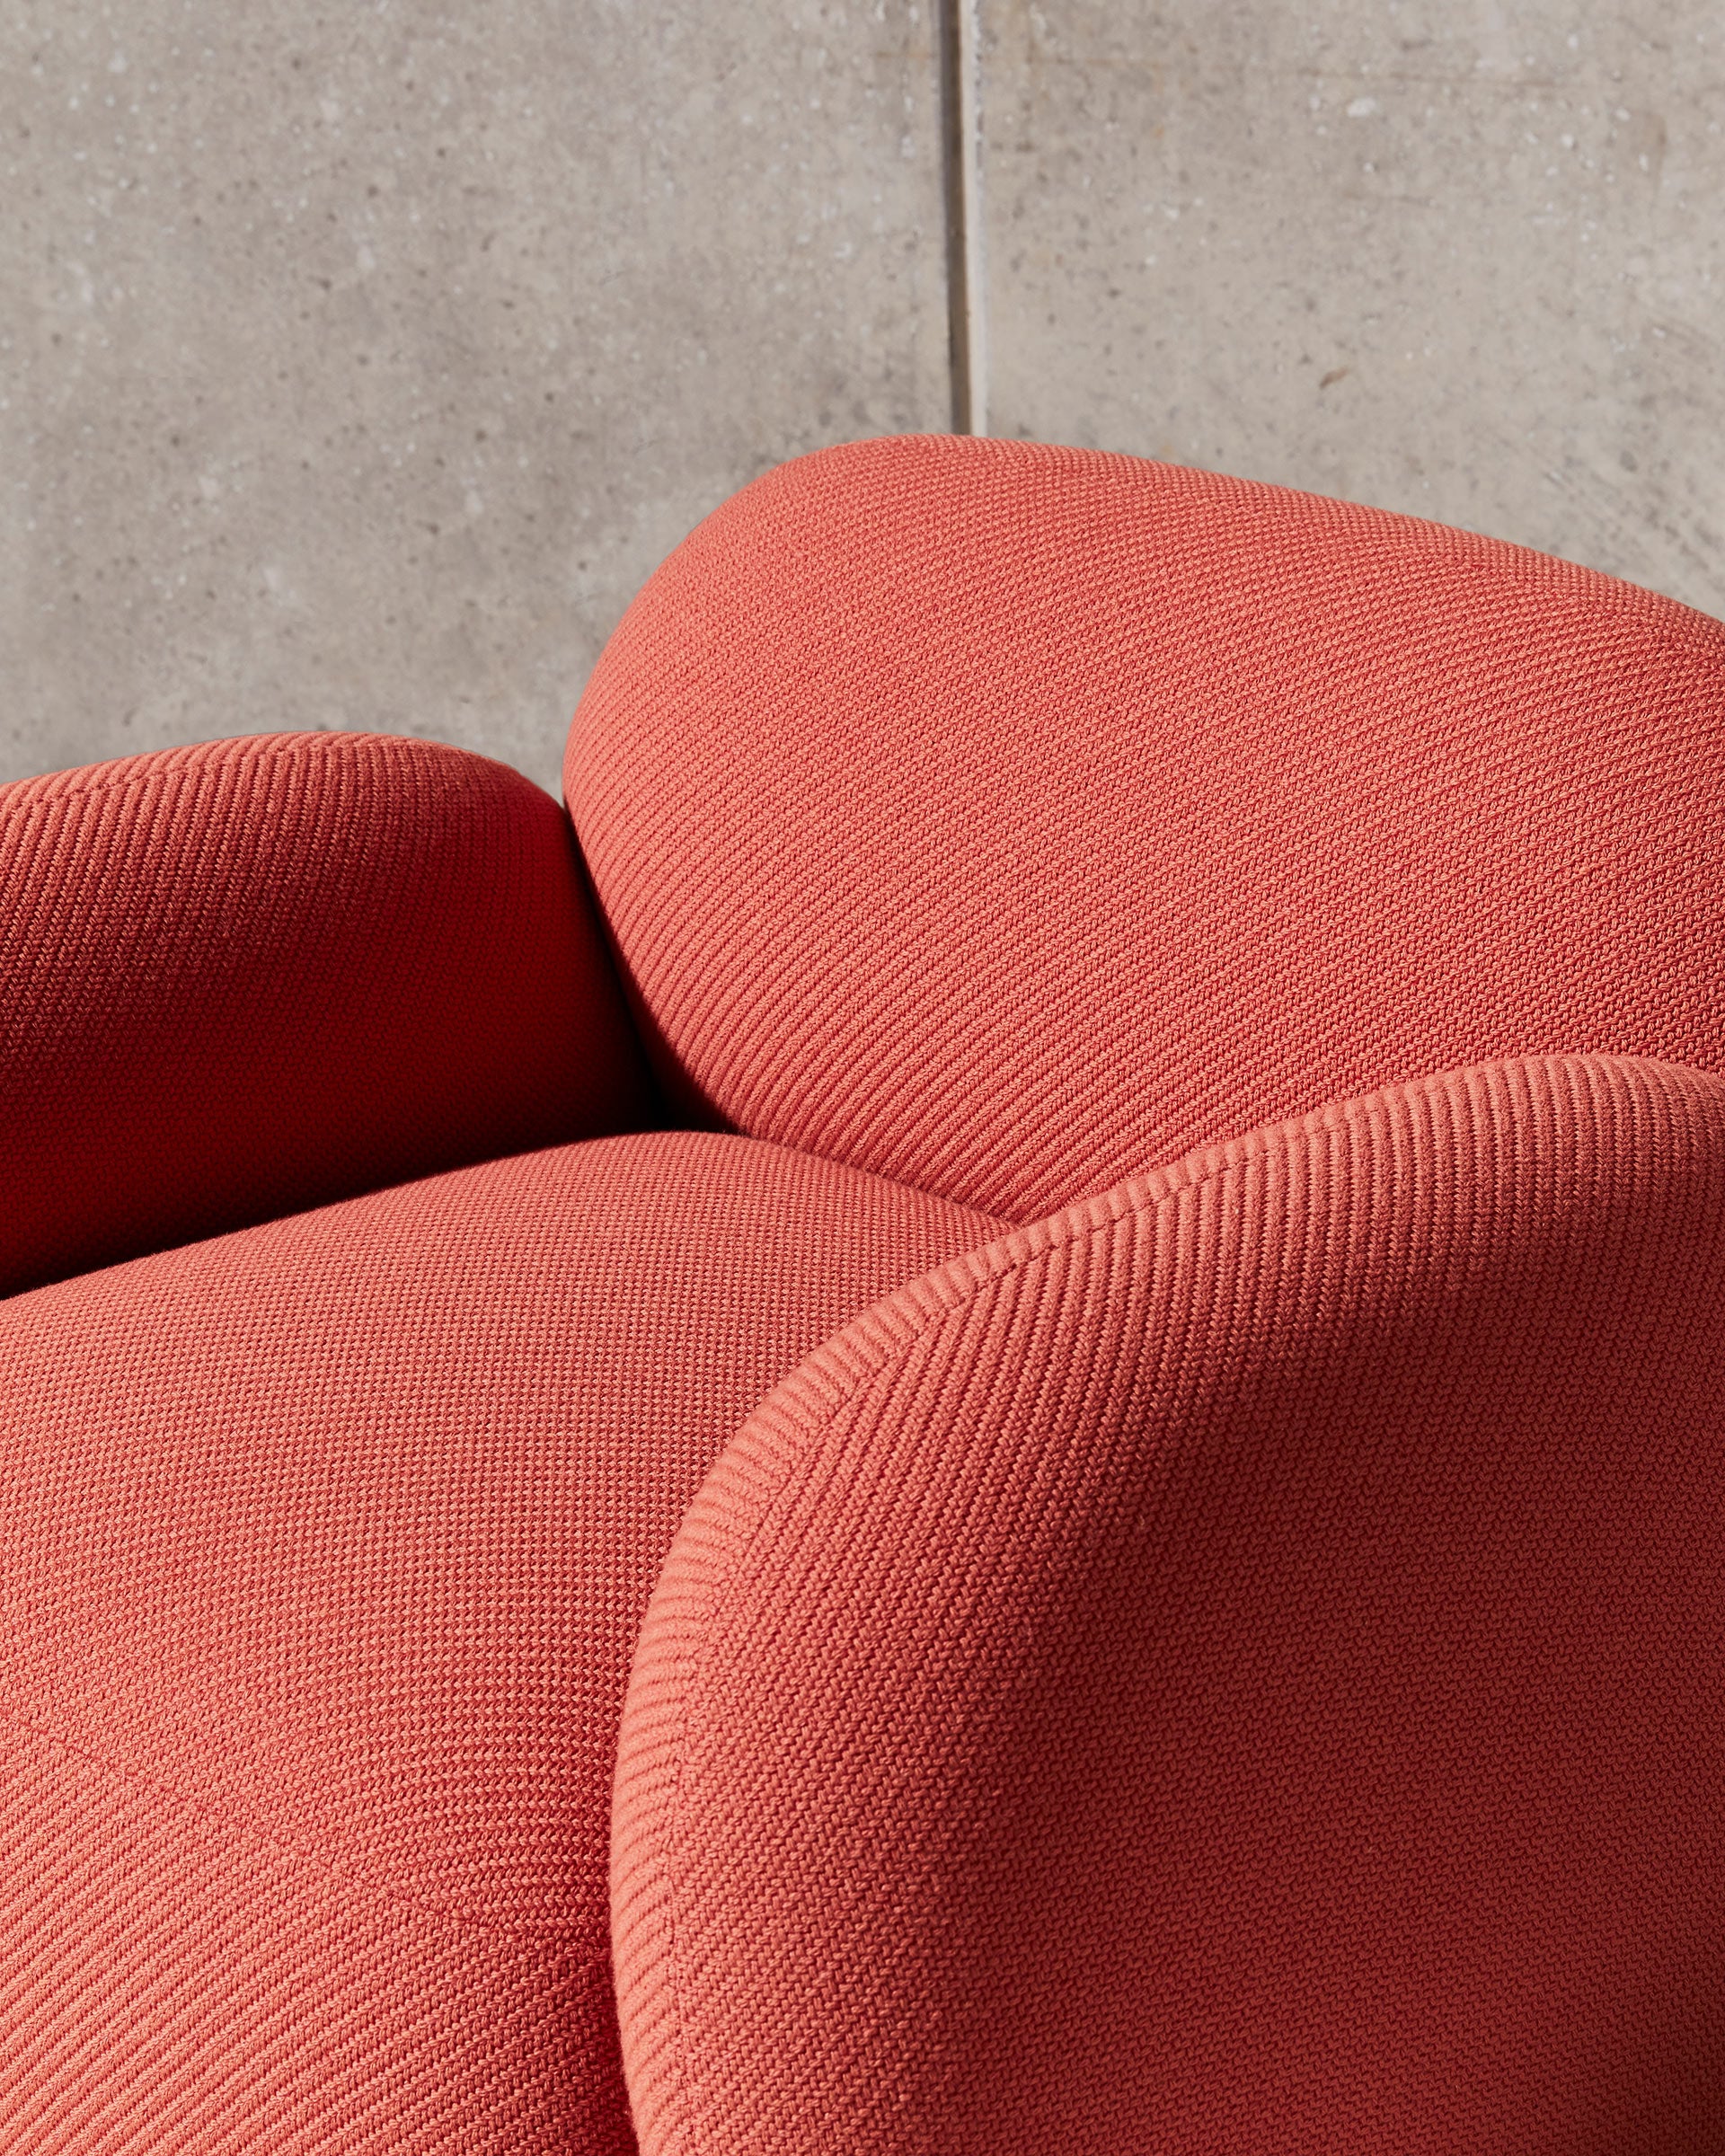 Sundae Armchairs & Lounges | Upholstered Home and Commercial Seating | Jason Ju | DesignByThem